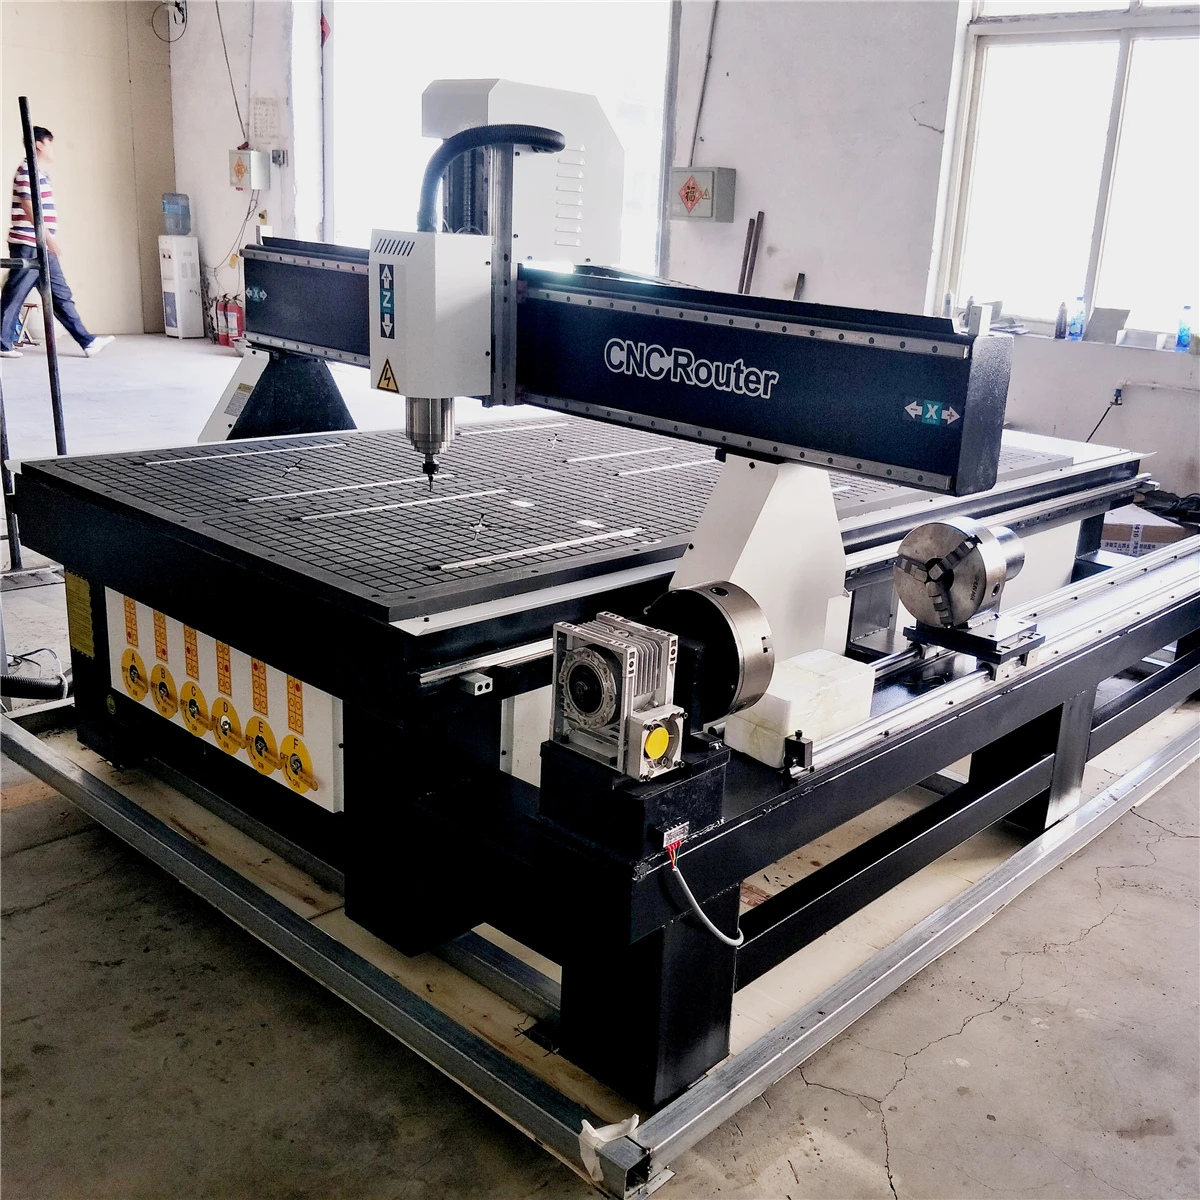 Hot-Mach3-1325-Cnc-Router-4-Axis-For-Sale-4×8-Feet-China-Cnc-Router-Machine-With.jpg